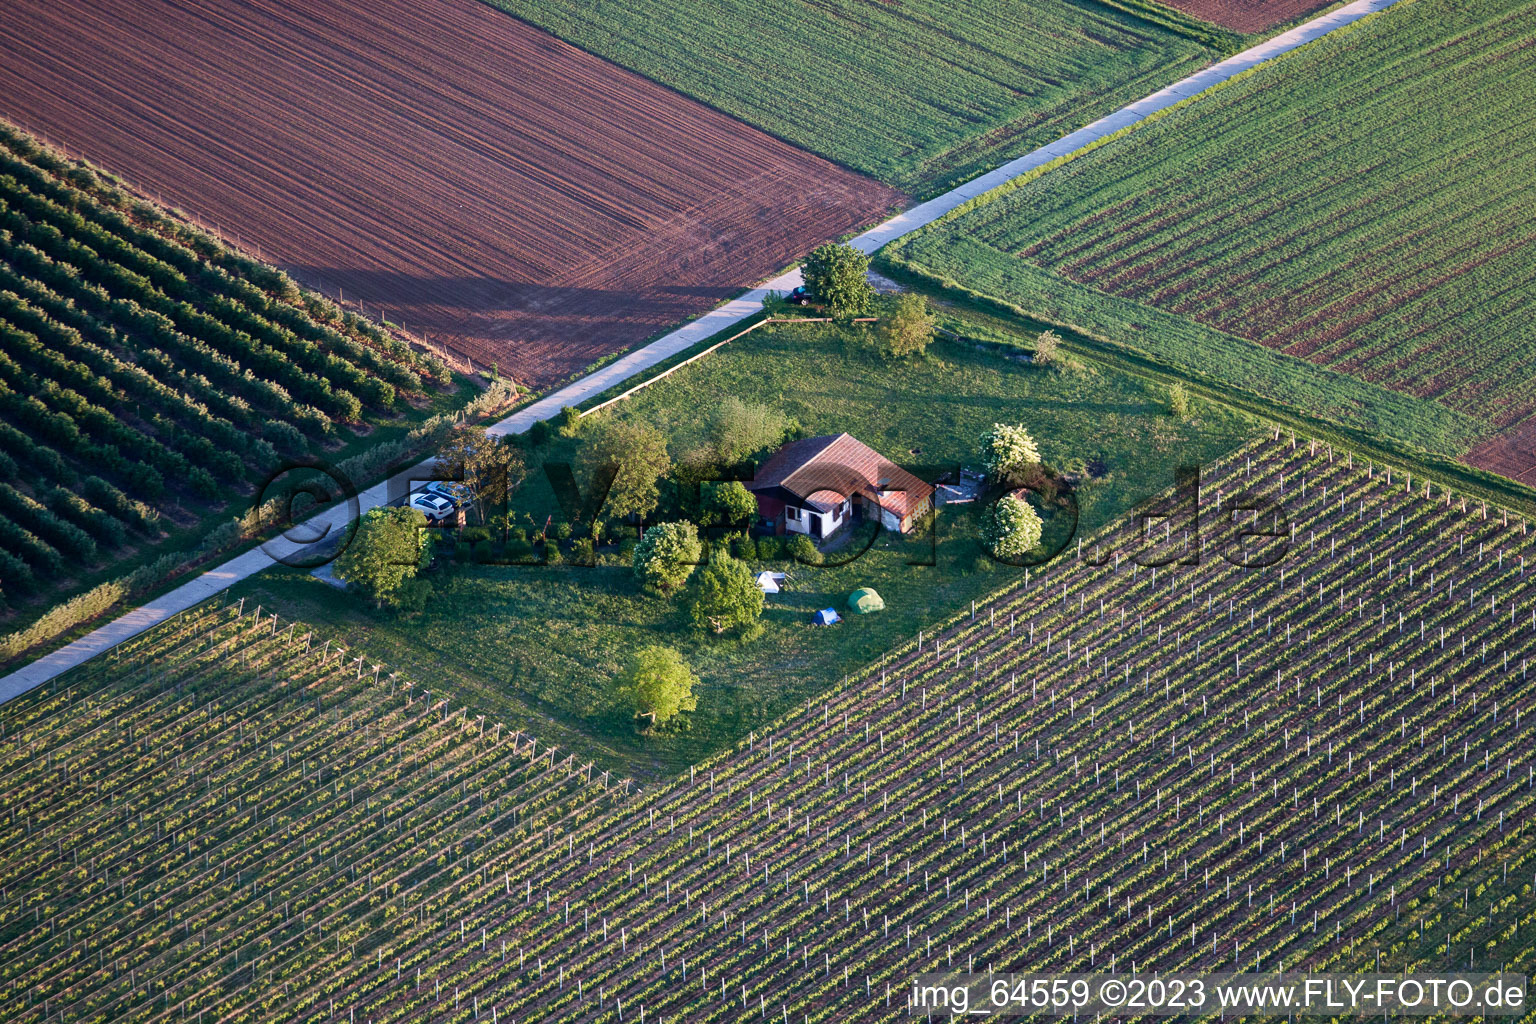 Drone recording of Impflingen in the state Rhineland-Palatinate, Germany